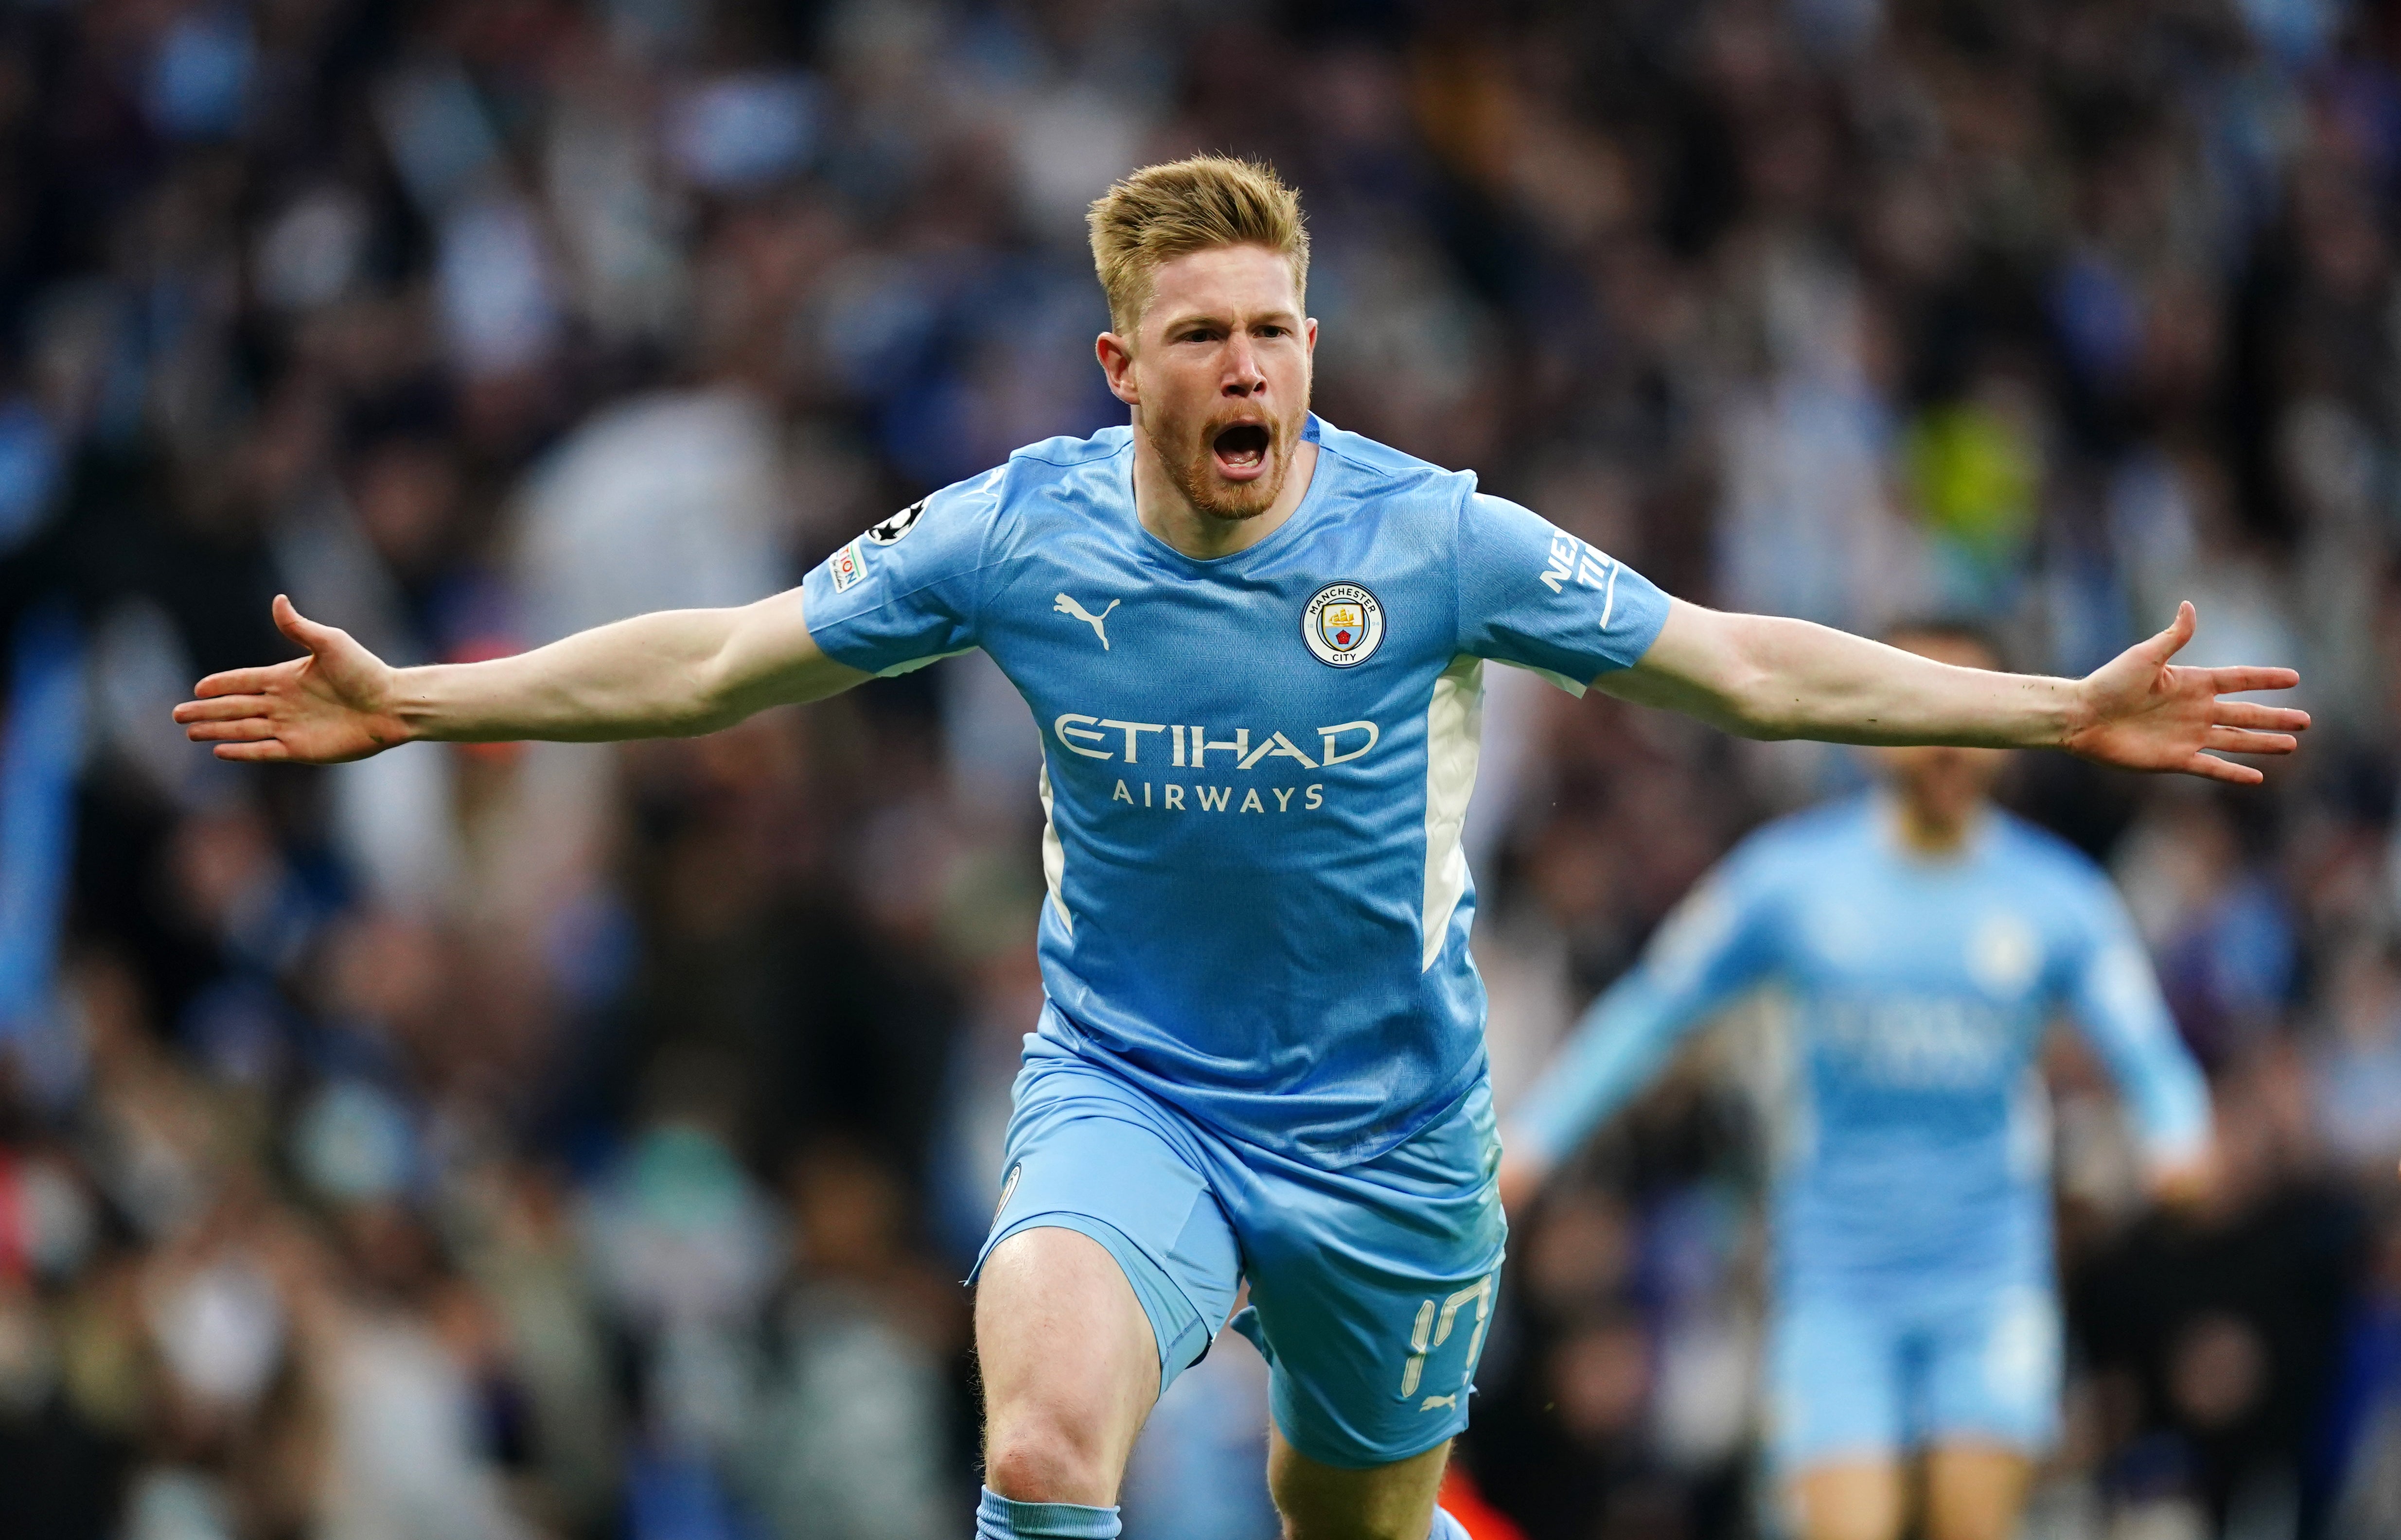 Kevin De Bruyne determined not to let level drop despite burnout fears |  The Independent